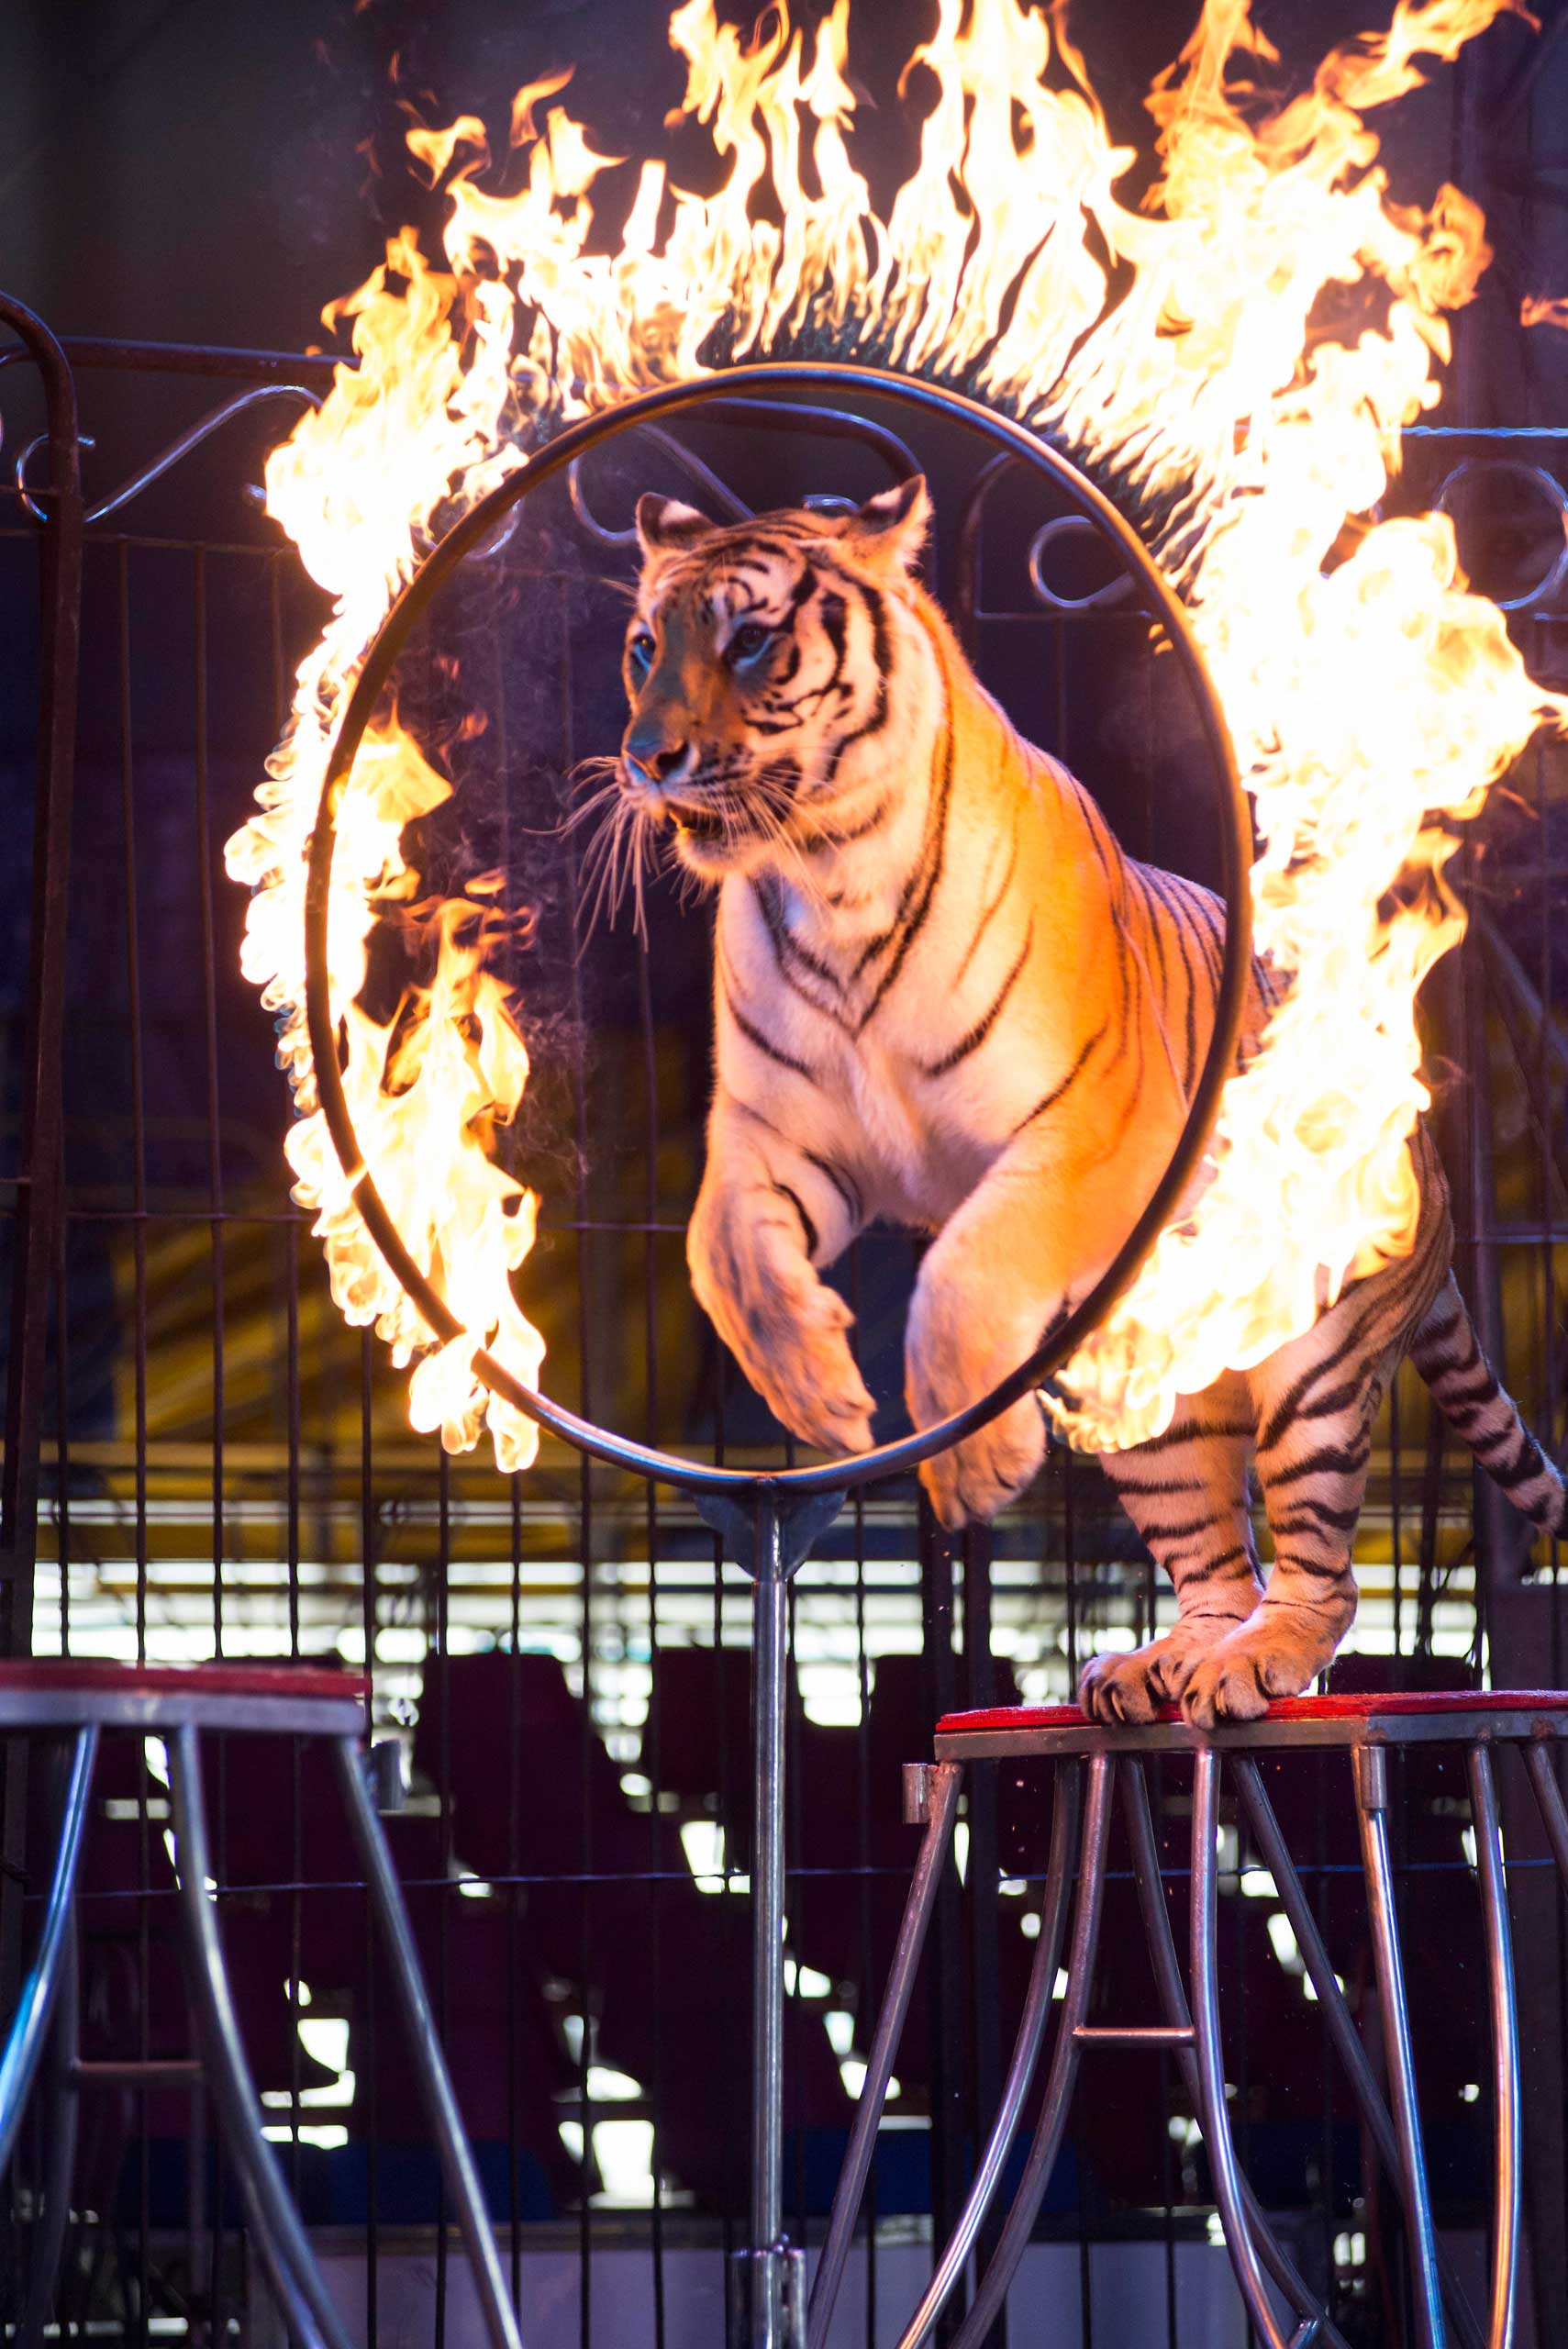 A tiger jumps through a ring of fire during a performance of the Fuentes Gasca Brothers Circus in Mexico City, June 22, 2014.